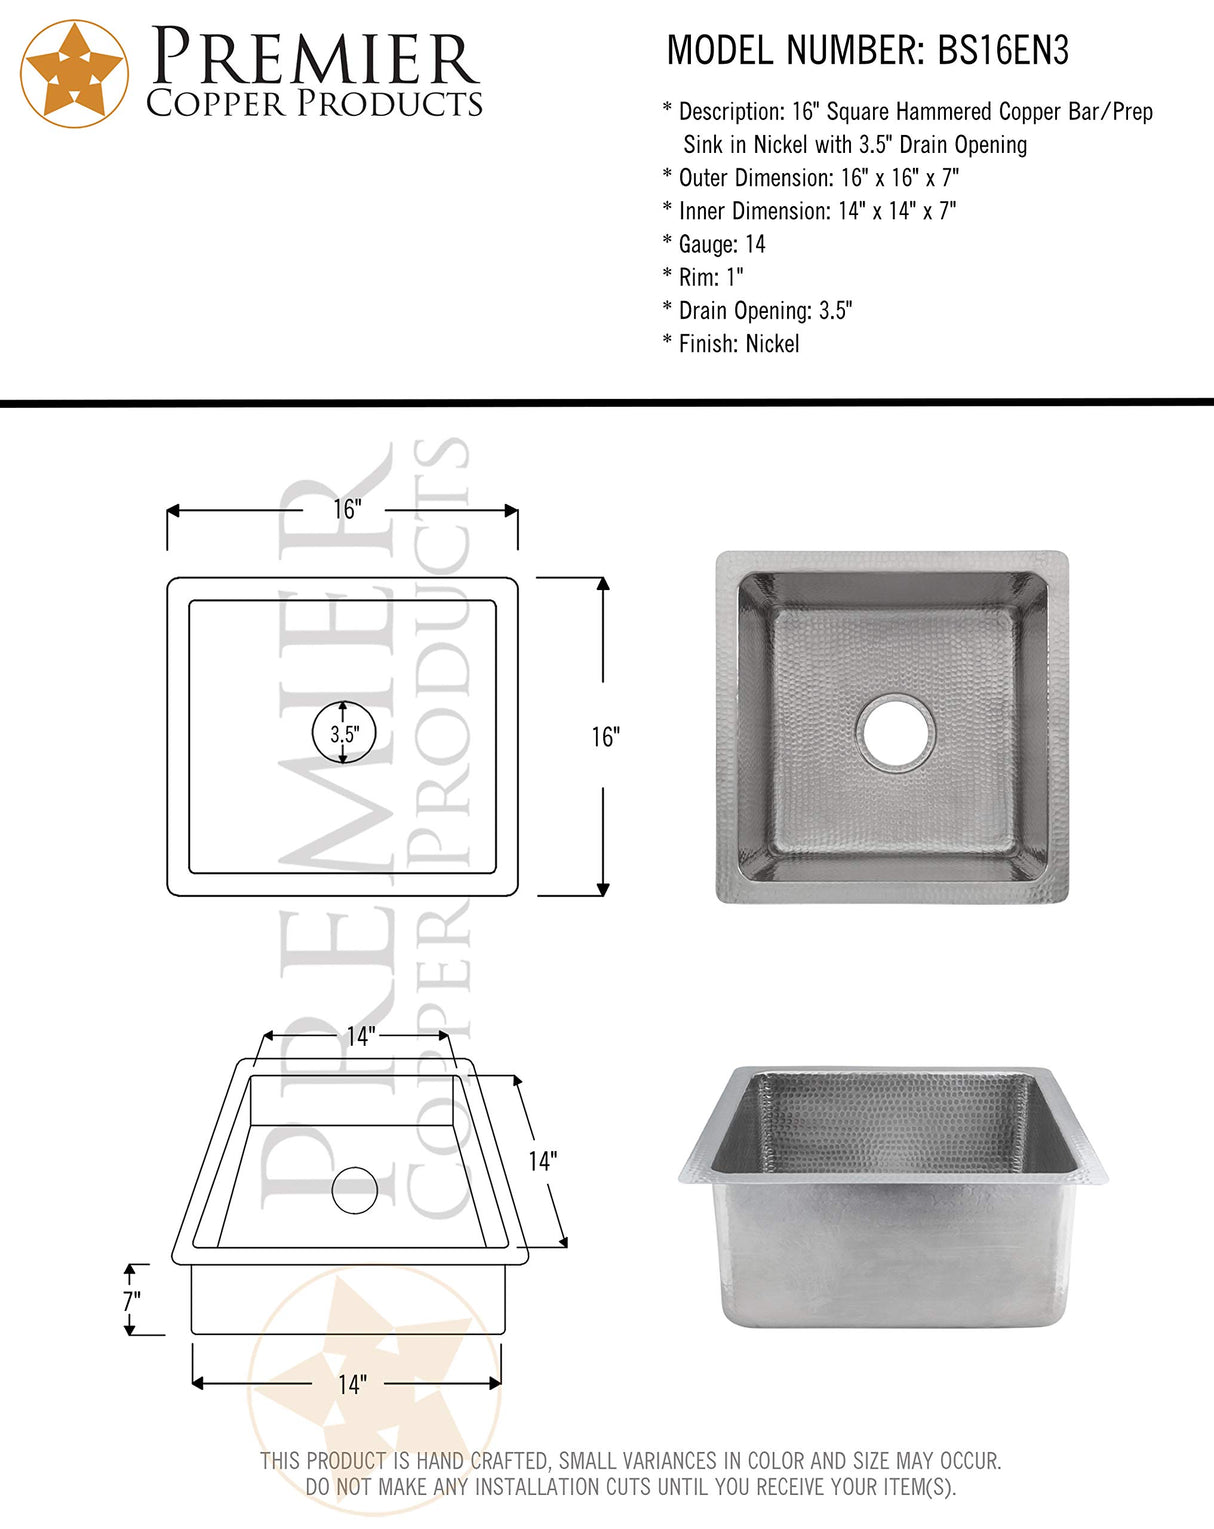 Premier Copper Products BS16EN3 16-Inch Square Hammered Copper Bar/Prep Sink in Nickel w/ 3.5-Inch Drain Opening